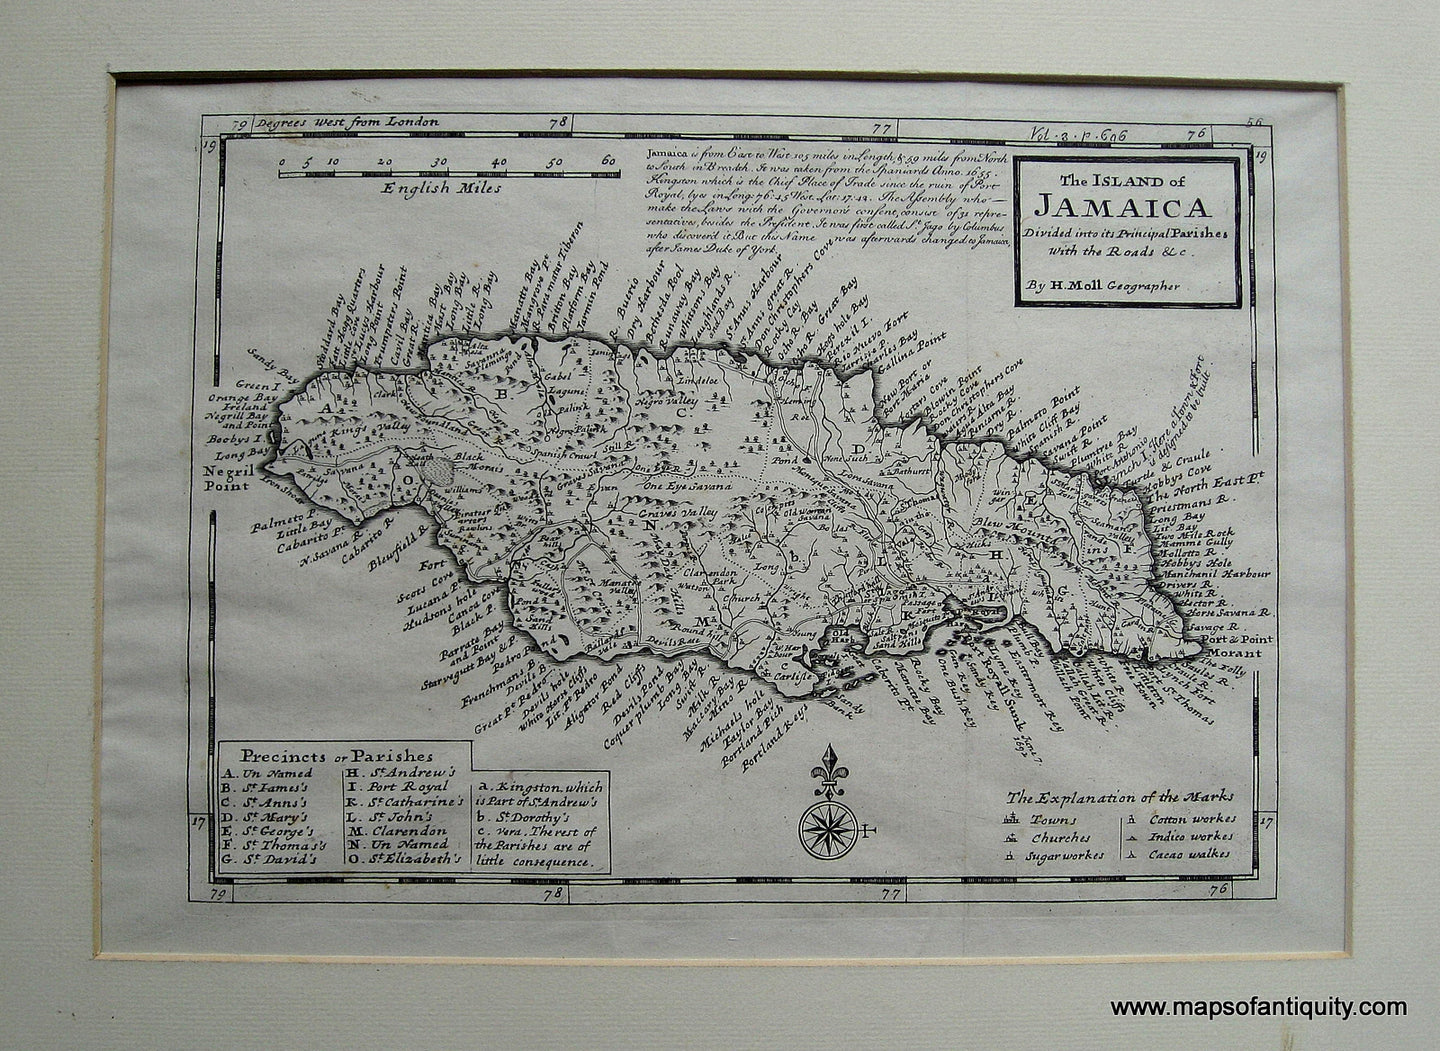 Black-and-White-Antique-Map-The-Island-of-Jamaica-Divided-into-its-Principal-Parishes-with-the-Roads-&c.--West-Indies-1732-(circa-1732)-Hermann-Moll-Maps-Of-Antiquity